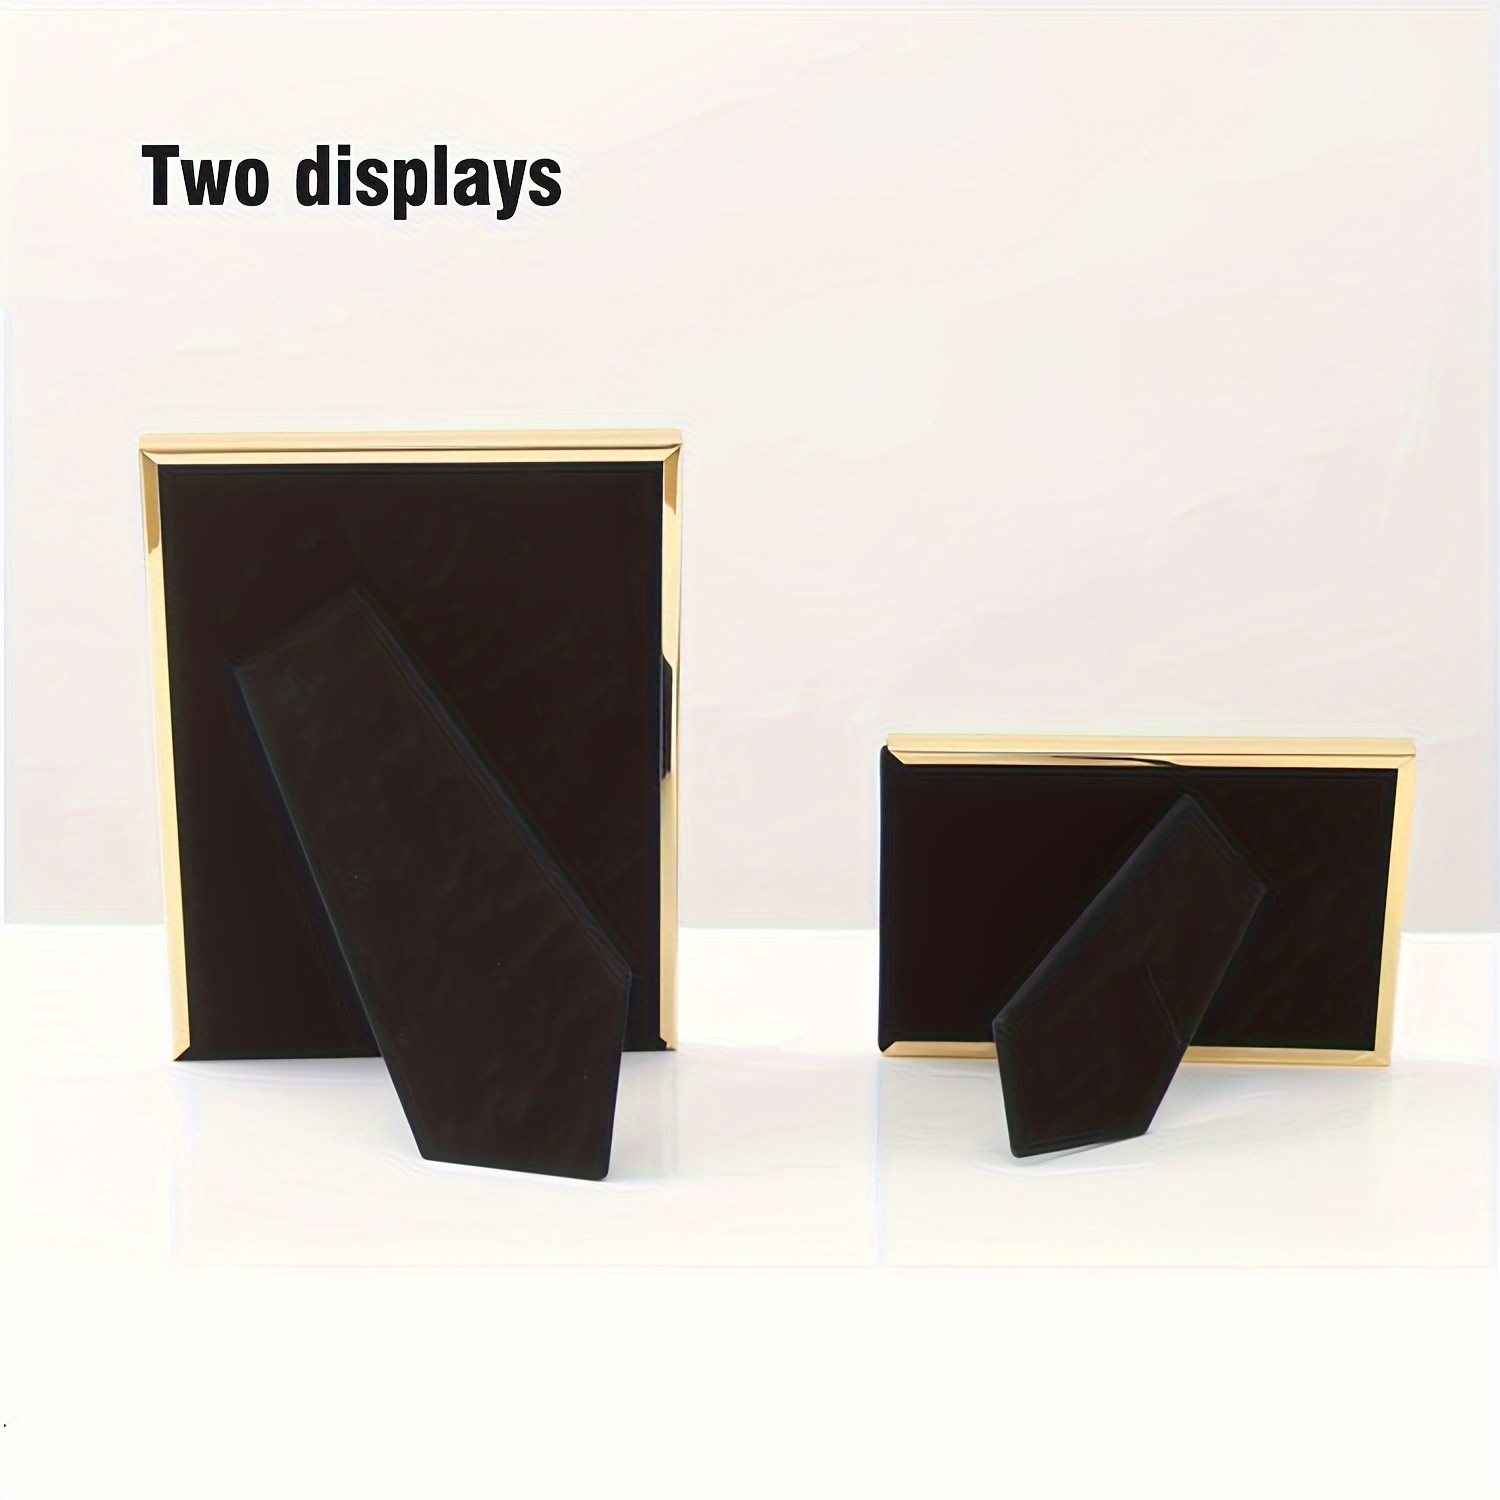 8x10 Picture Frame Display Pictures 5x7 With Mat Or 8x10 - Temu